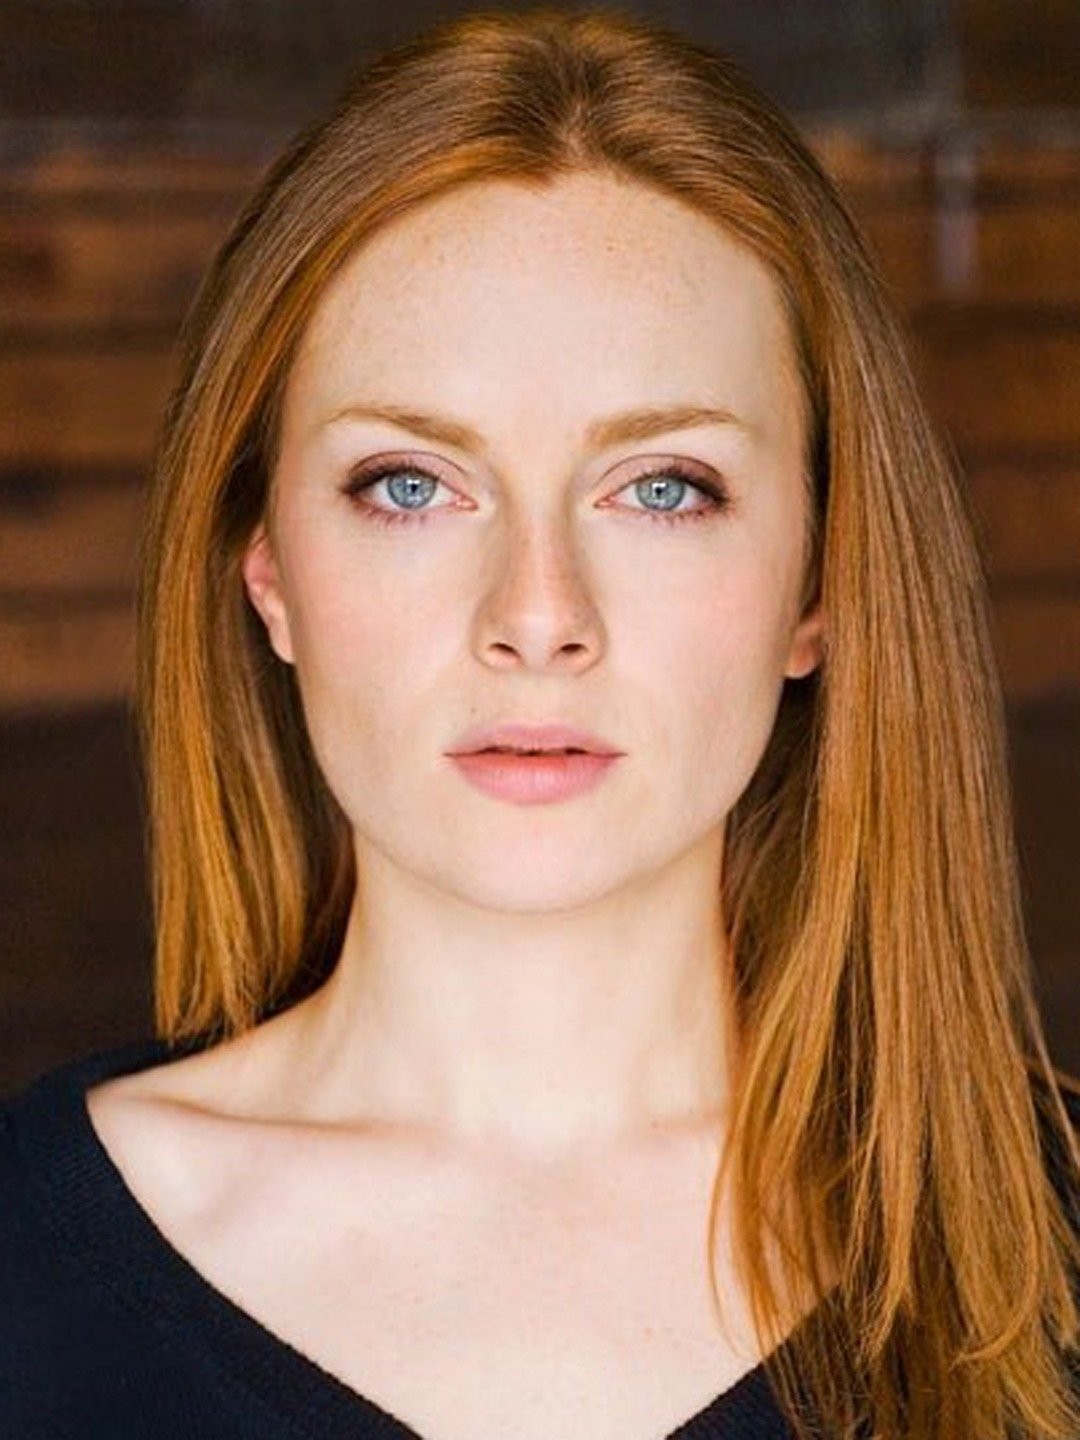 Alex paxton-beesley movies and tv shows